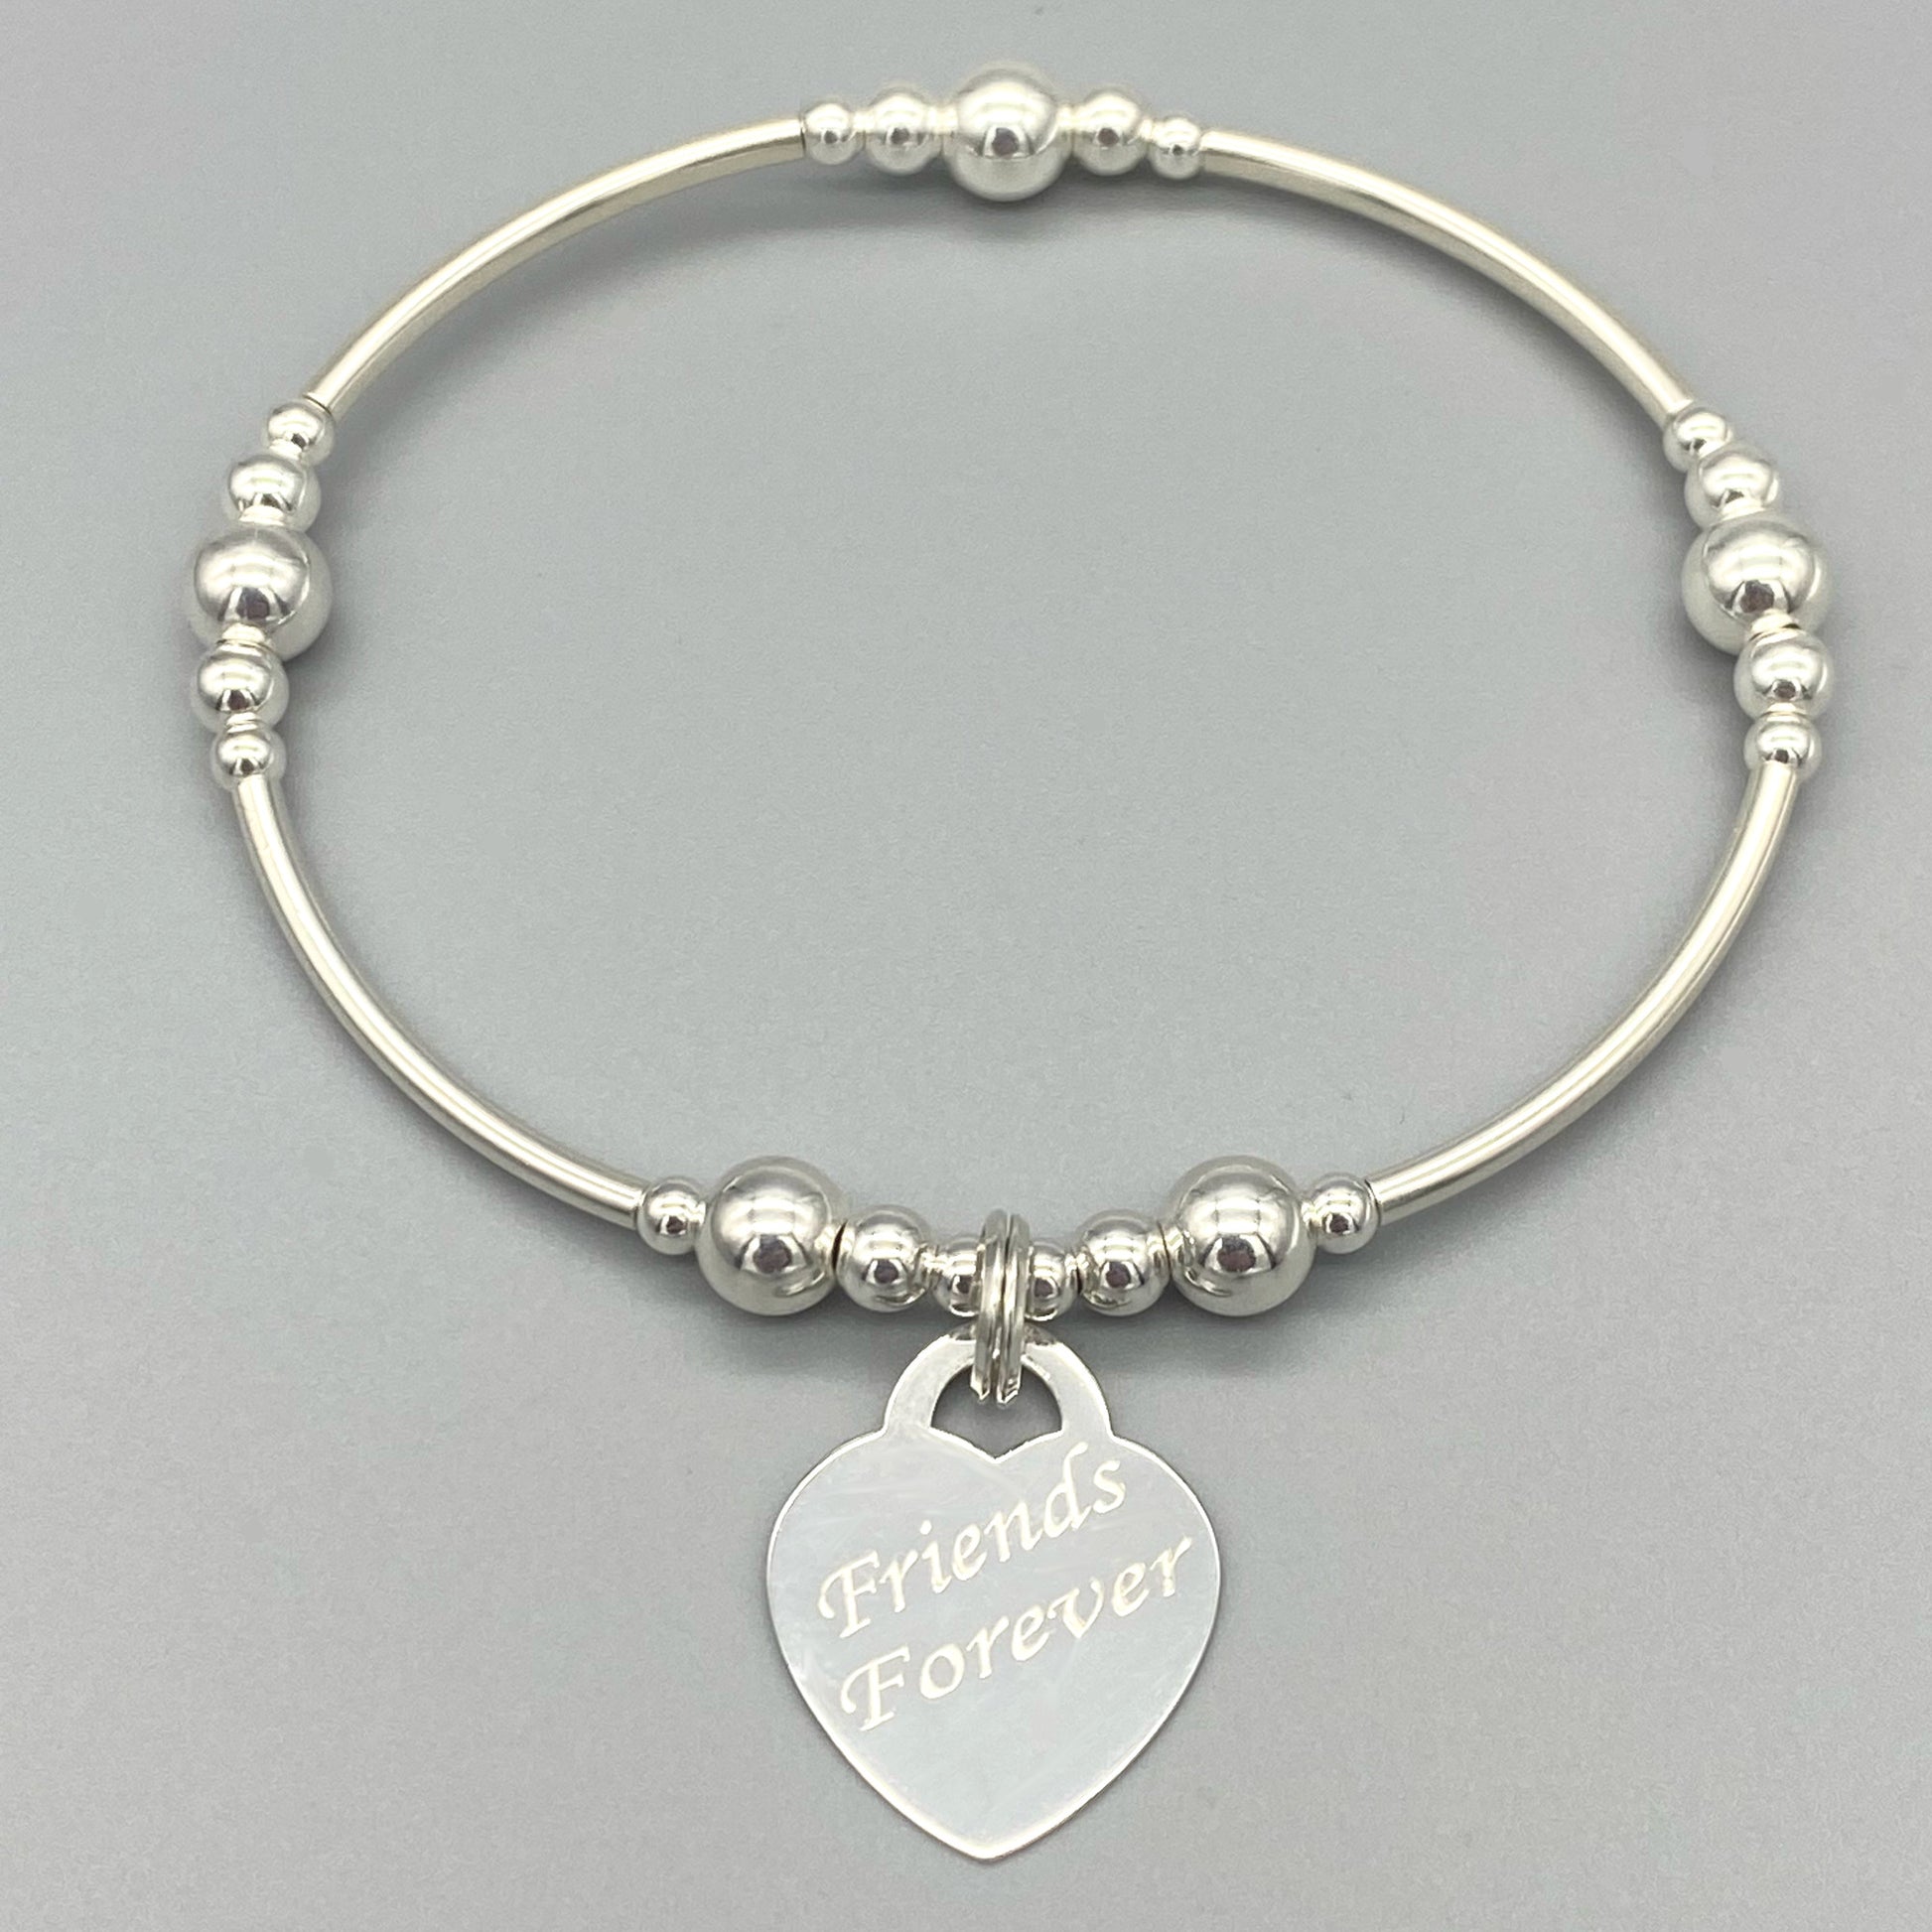 "Friends Forever" heart charm sterling silver stacking bracelet for her by My Silver Wish